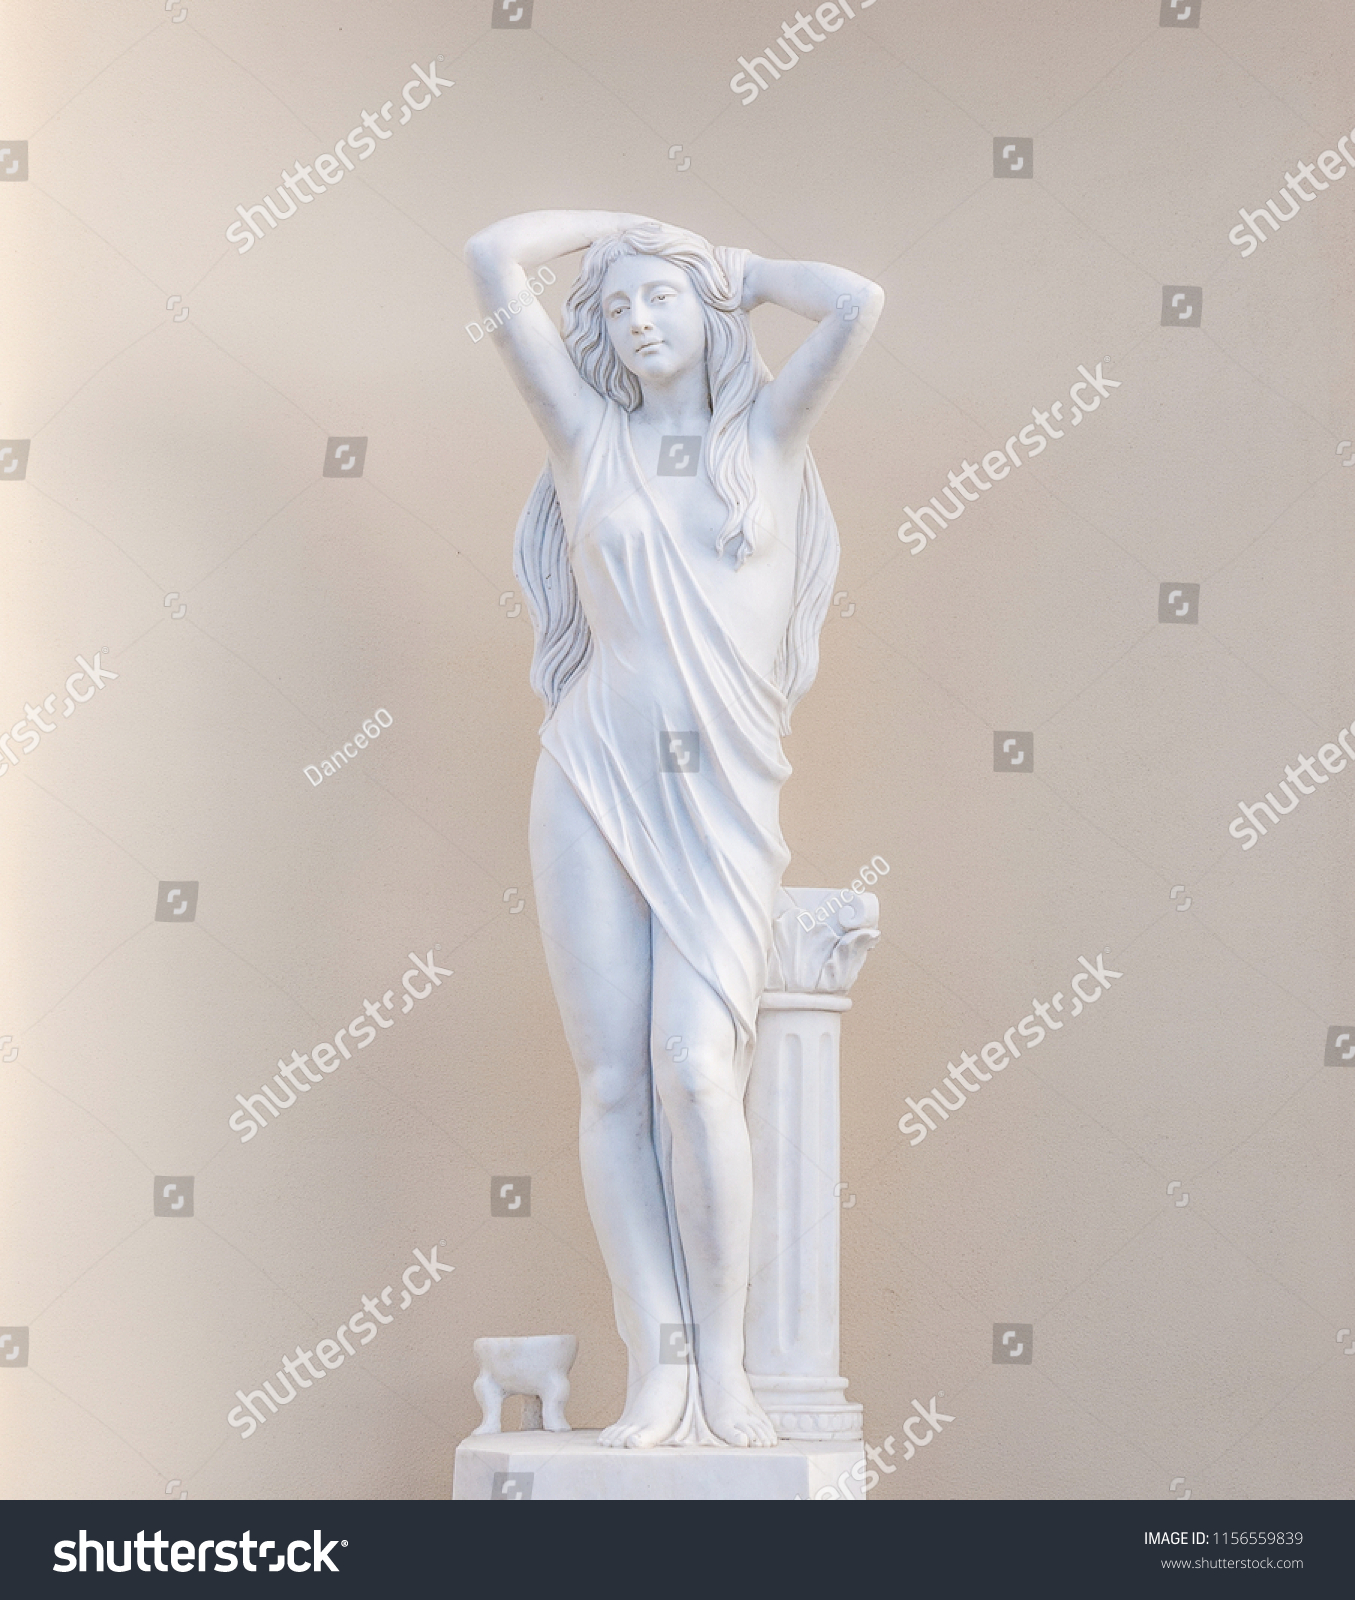 Garden sculpture depicts the figure of a beautiful young woman (not the author's work) #1156559839